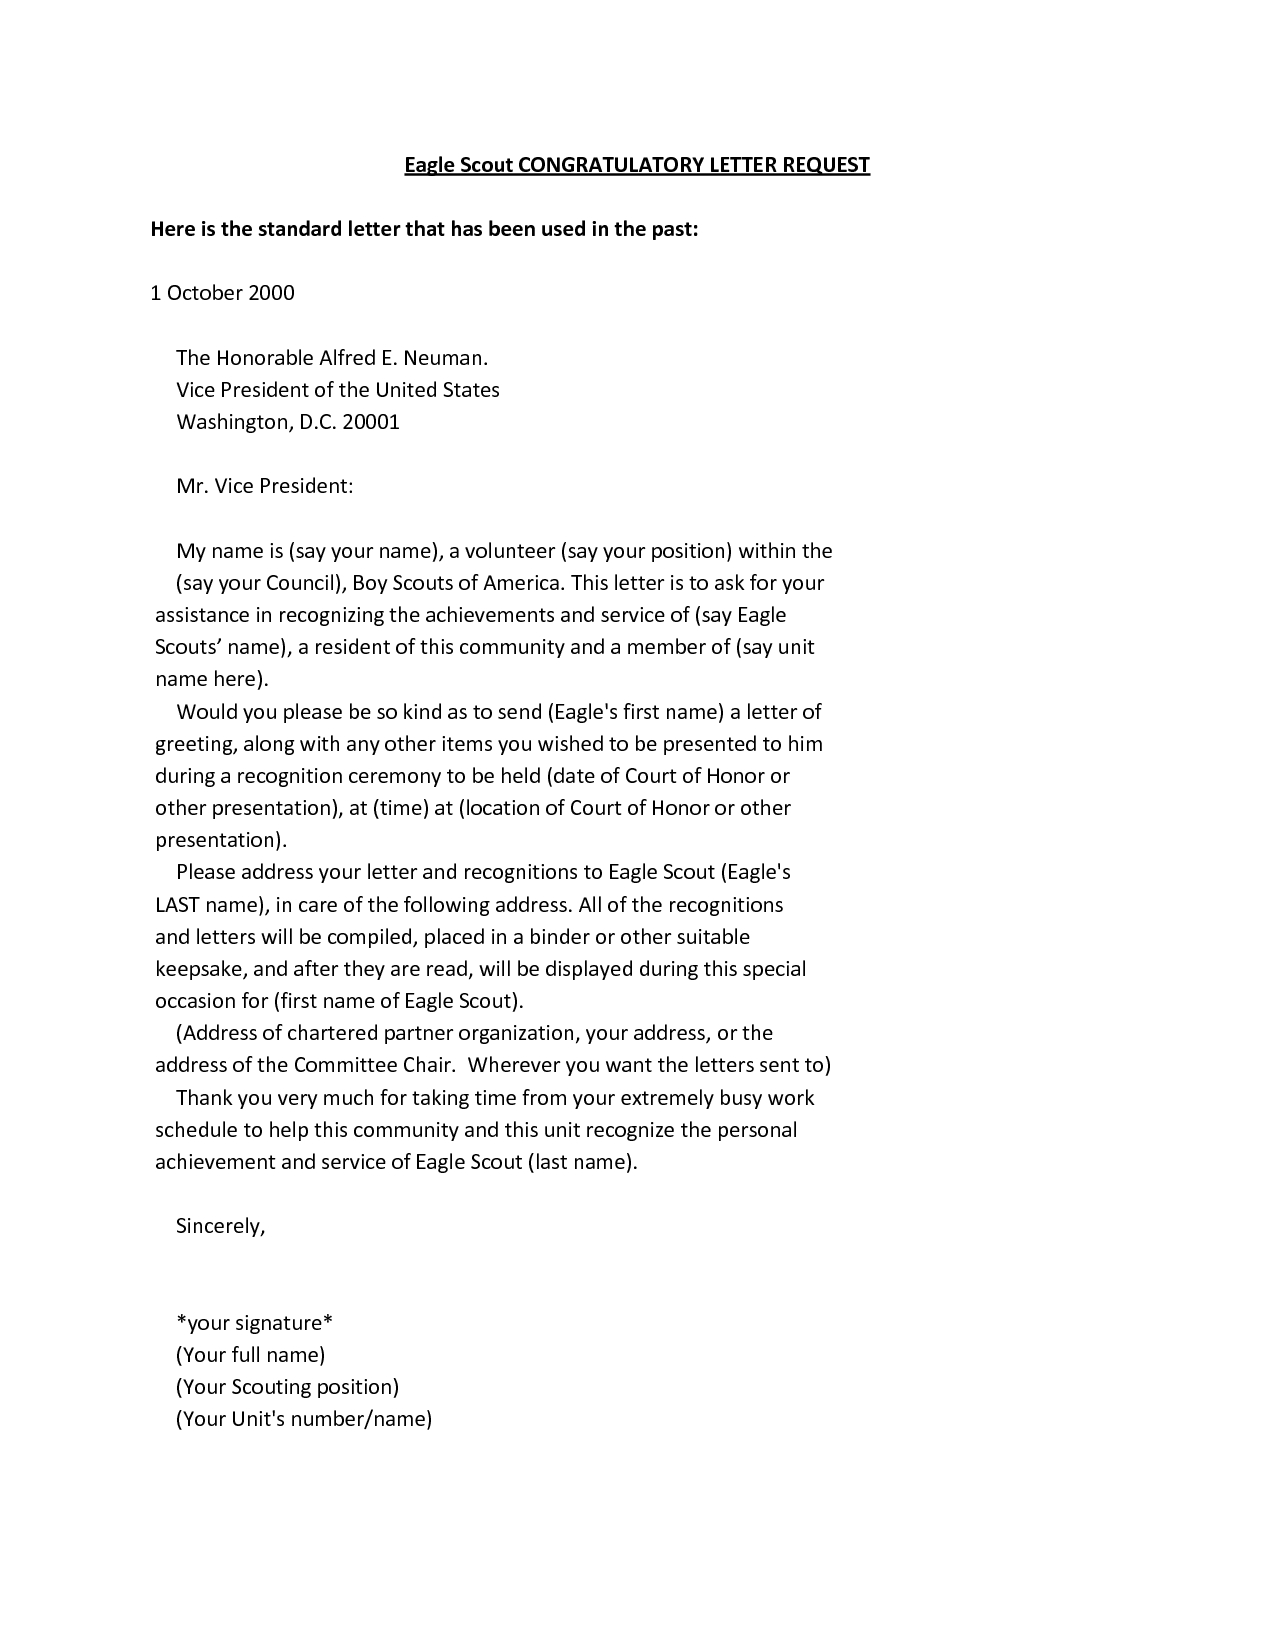 Letter Of Recommendation Request Template - Sample Eagle Scout Letter Of Re Mendation Request Acurnamedia